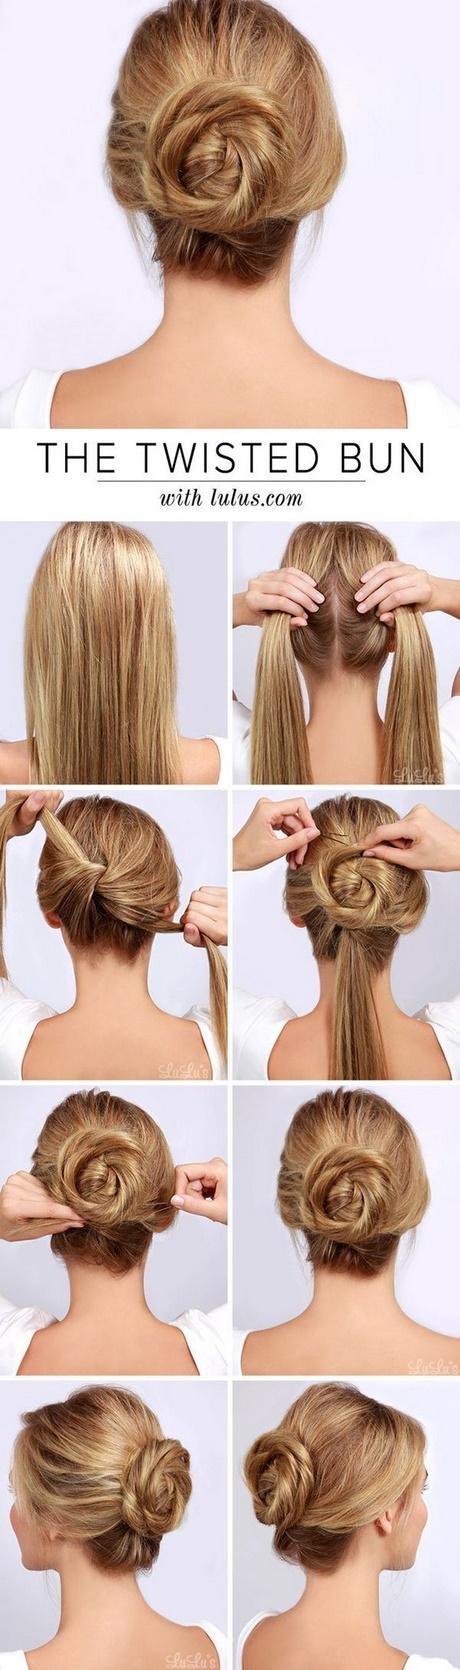 Simple hairstyles for everyday simple-hairstyles-for-everyday-61_7